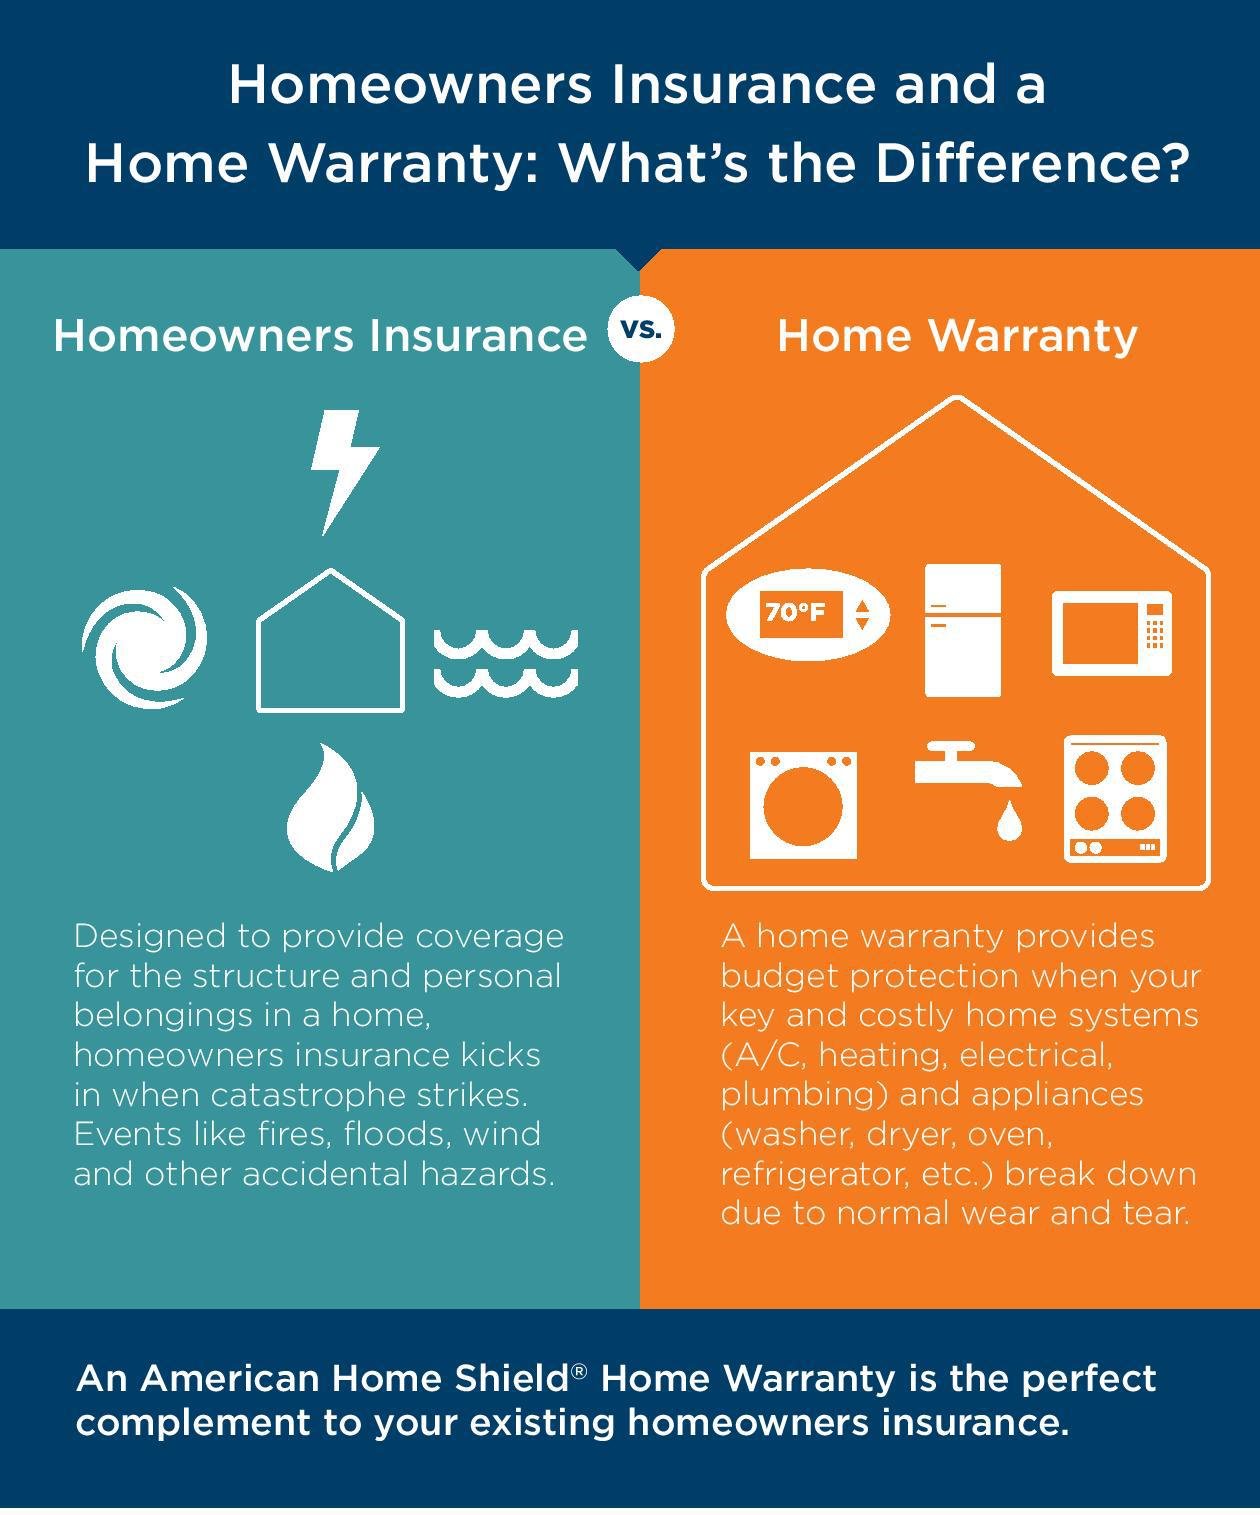 In Suitland, MD, Madelynn Avery and Emilie Pitts Learned About What's The Difference Between Home Warranty And Home Insurance thumbnail